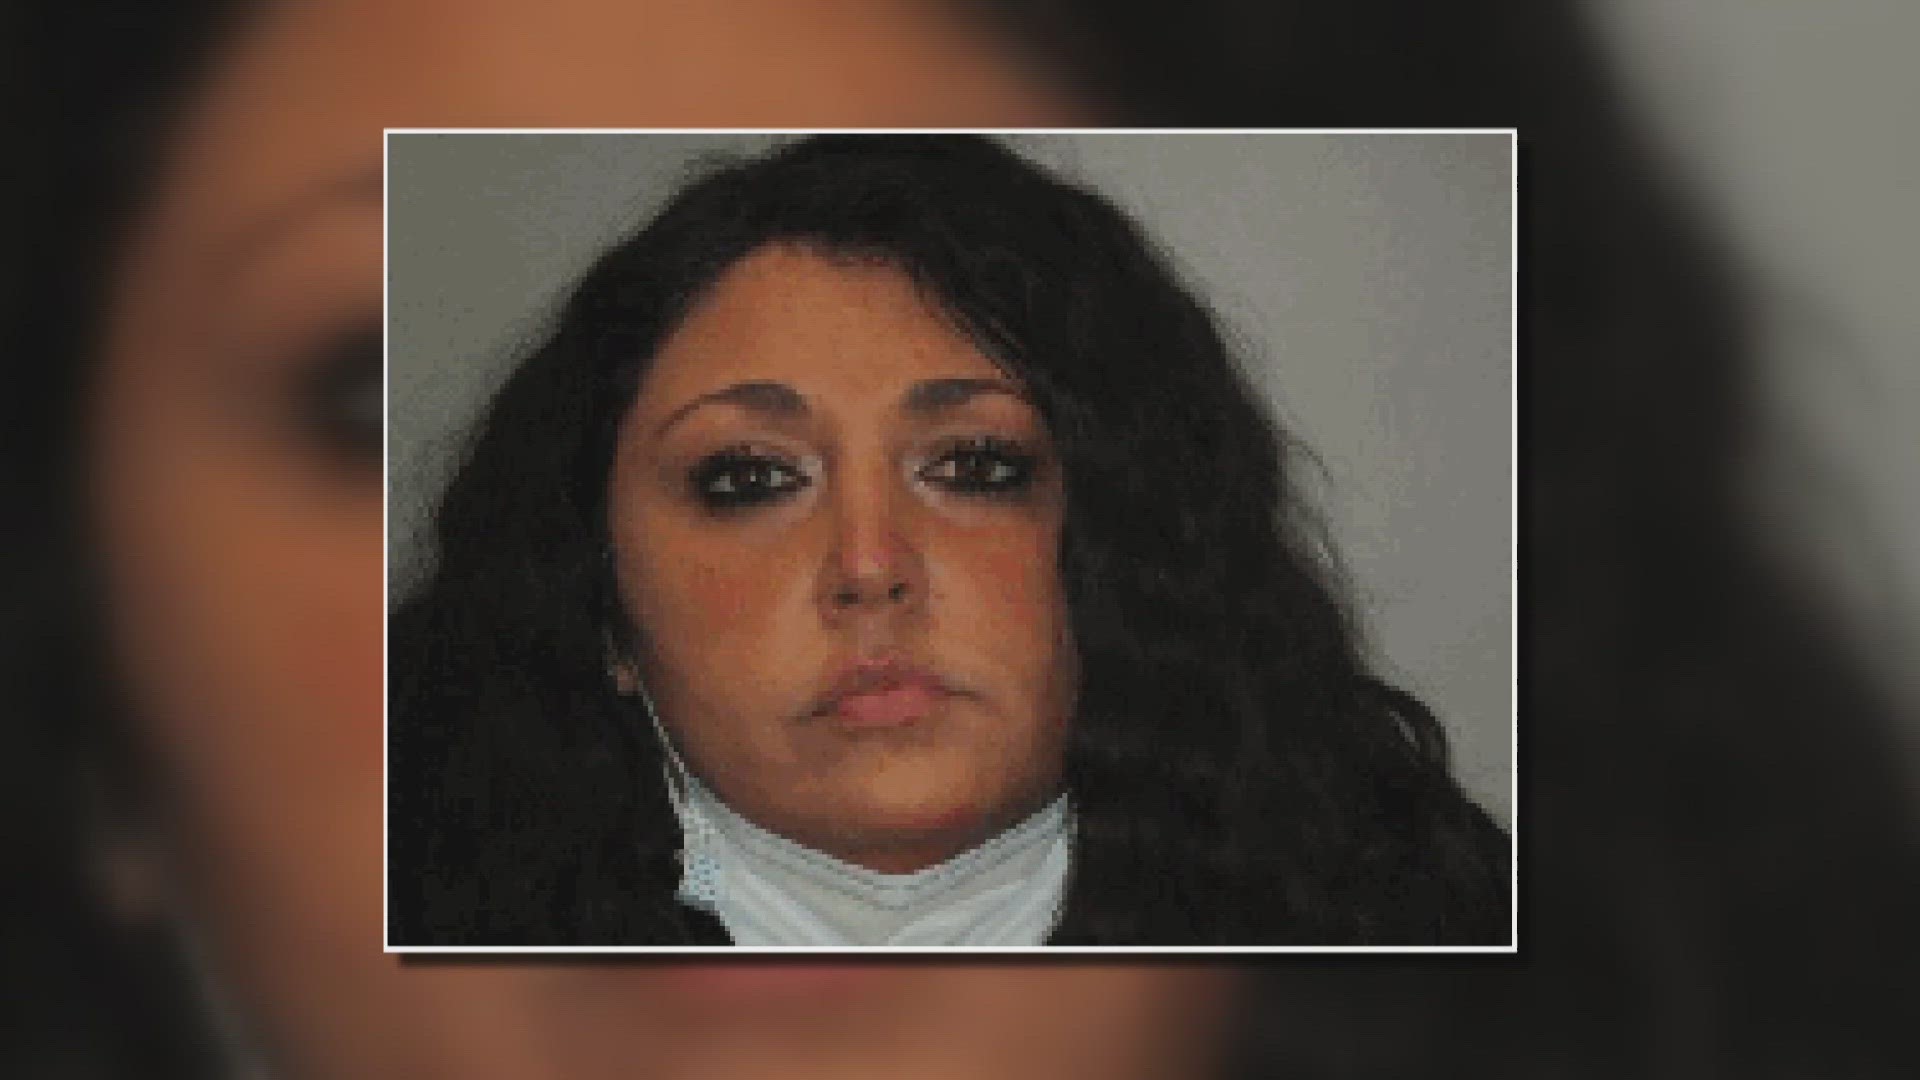 Lyndhurst police say they went through financial records, which allegedly showed the money was spent by LaRiccia with a majority going toward food and entertainment.